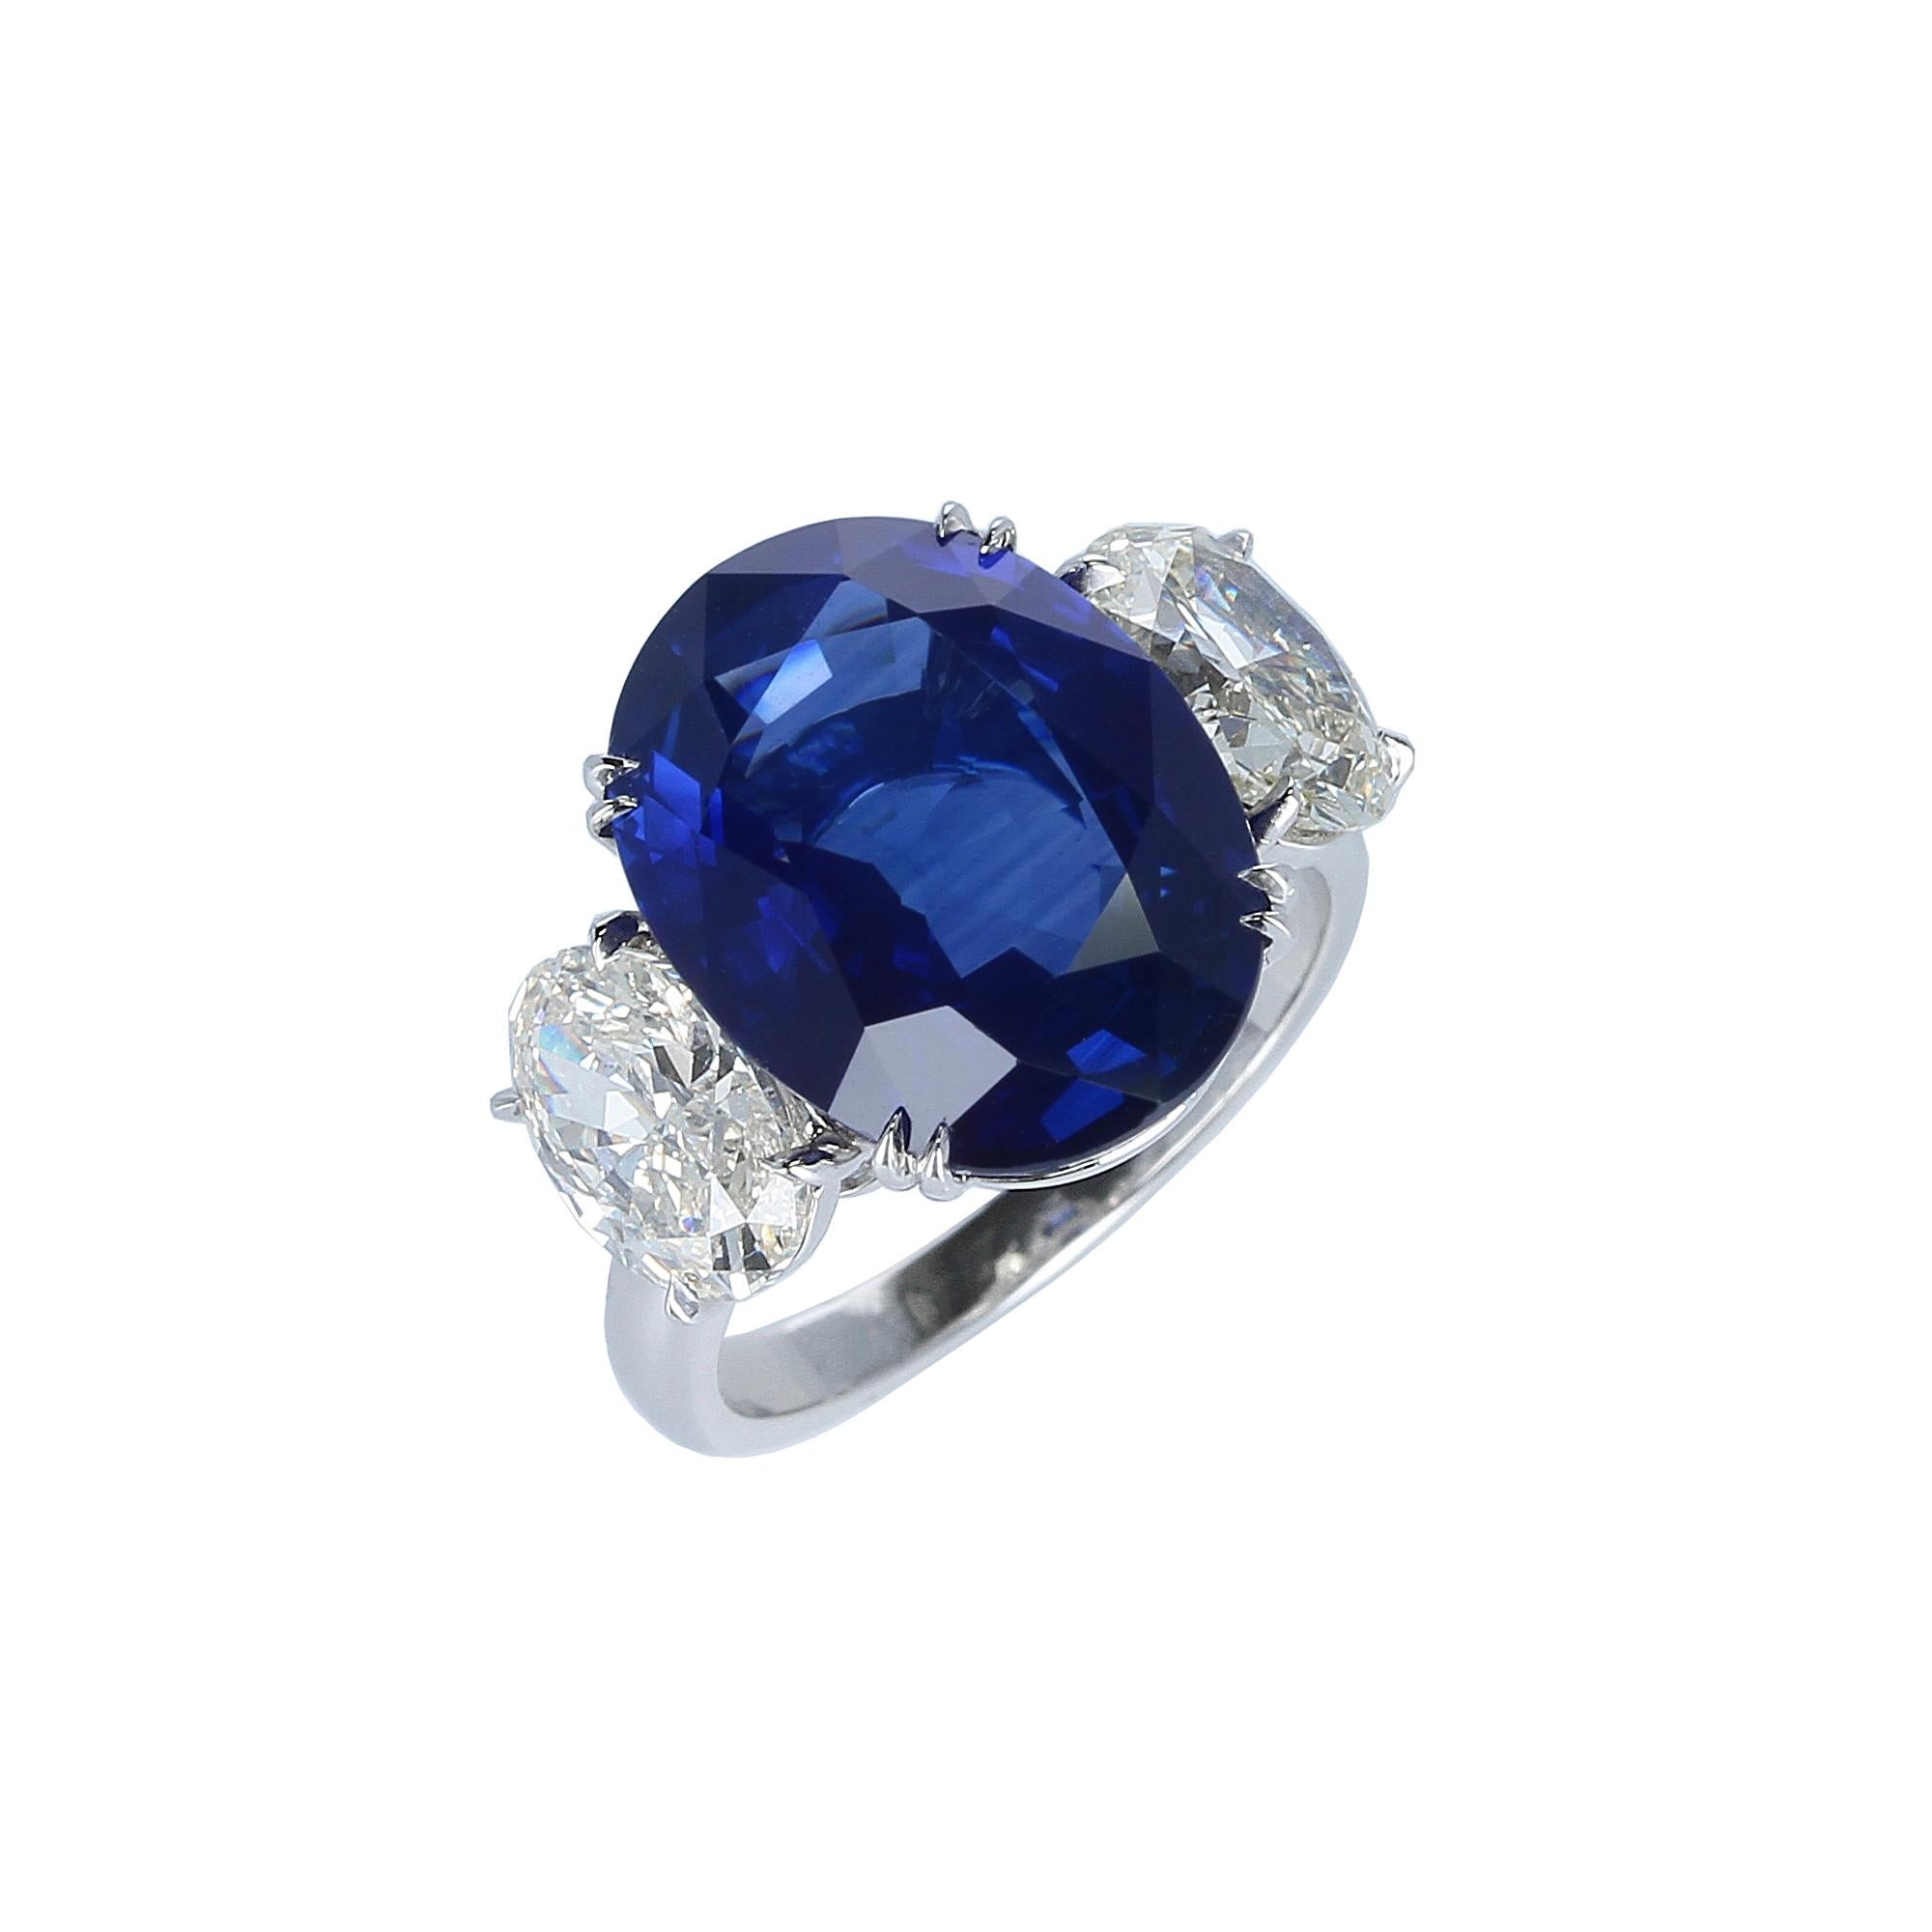 A classic and vibrant three-stone oval sapphire and diamond ring set with an impressive ten-carat plus oval shape mixed-cut sapphire from Ceylon (Sri Lanka), accented with two GIA certified oval brilliant-cut diamonds weighing a total of 2.59